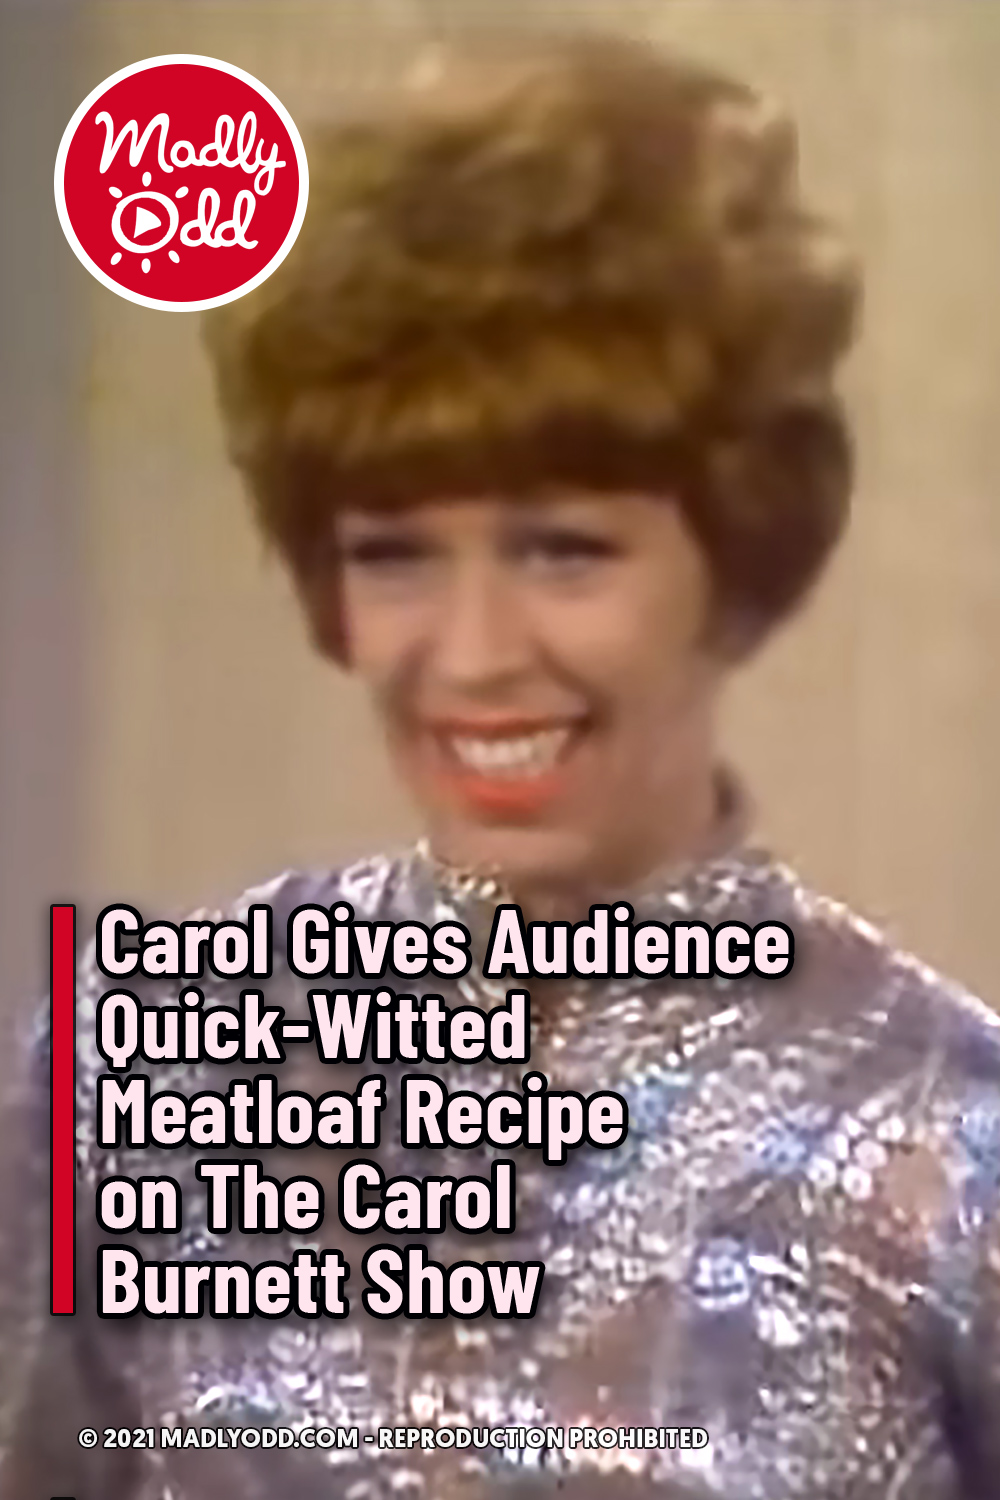 Carol Gives Audience Quick-Witted Meatloaf Recipe on The Carol Burnett Show